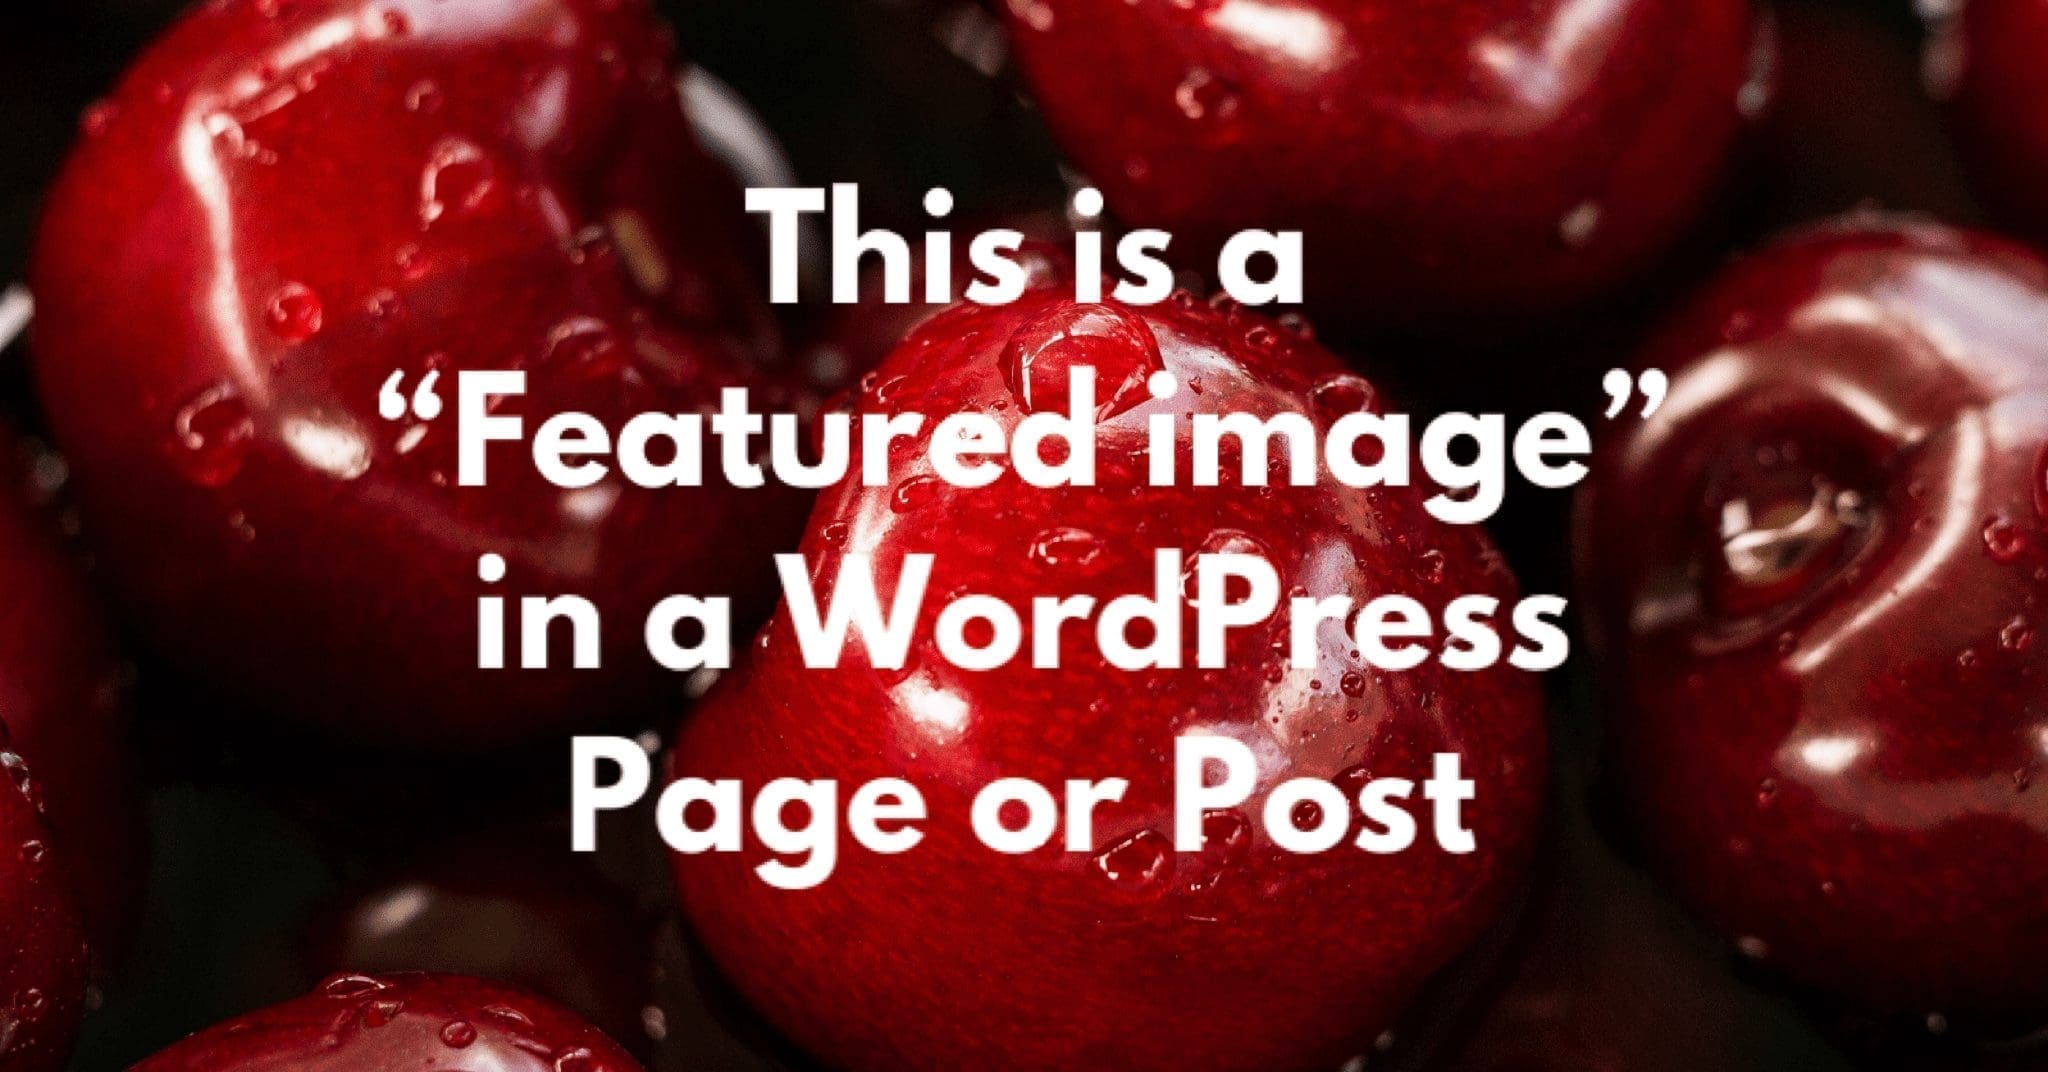 WordPress Featured Image Example for CyberGrapes